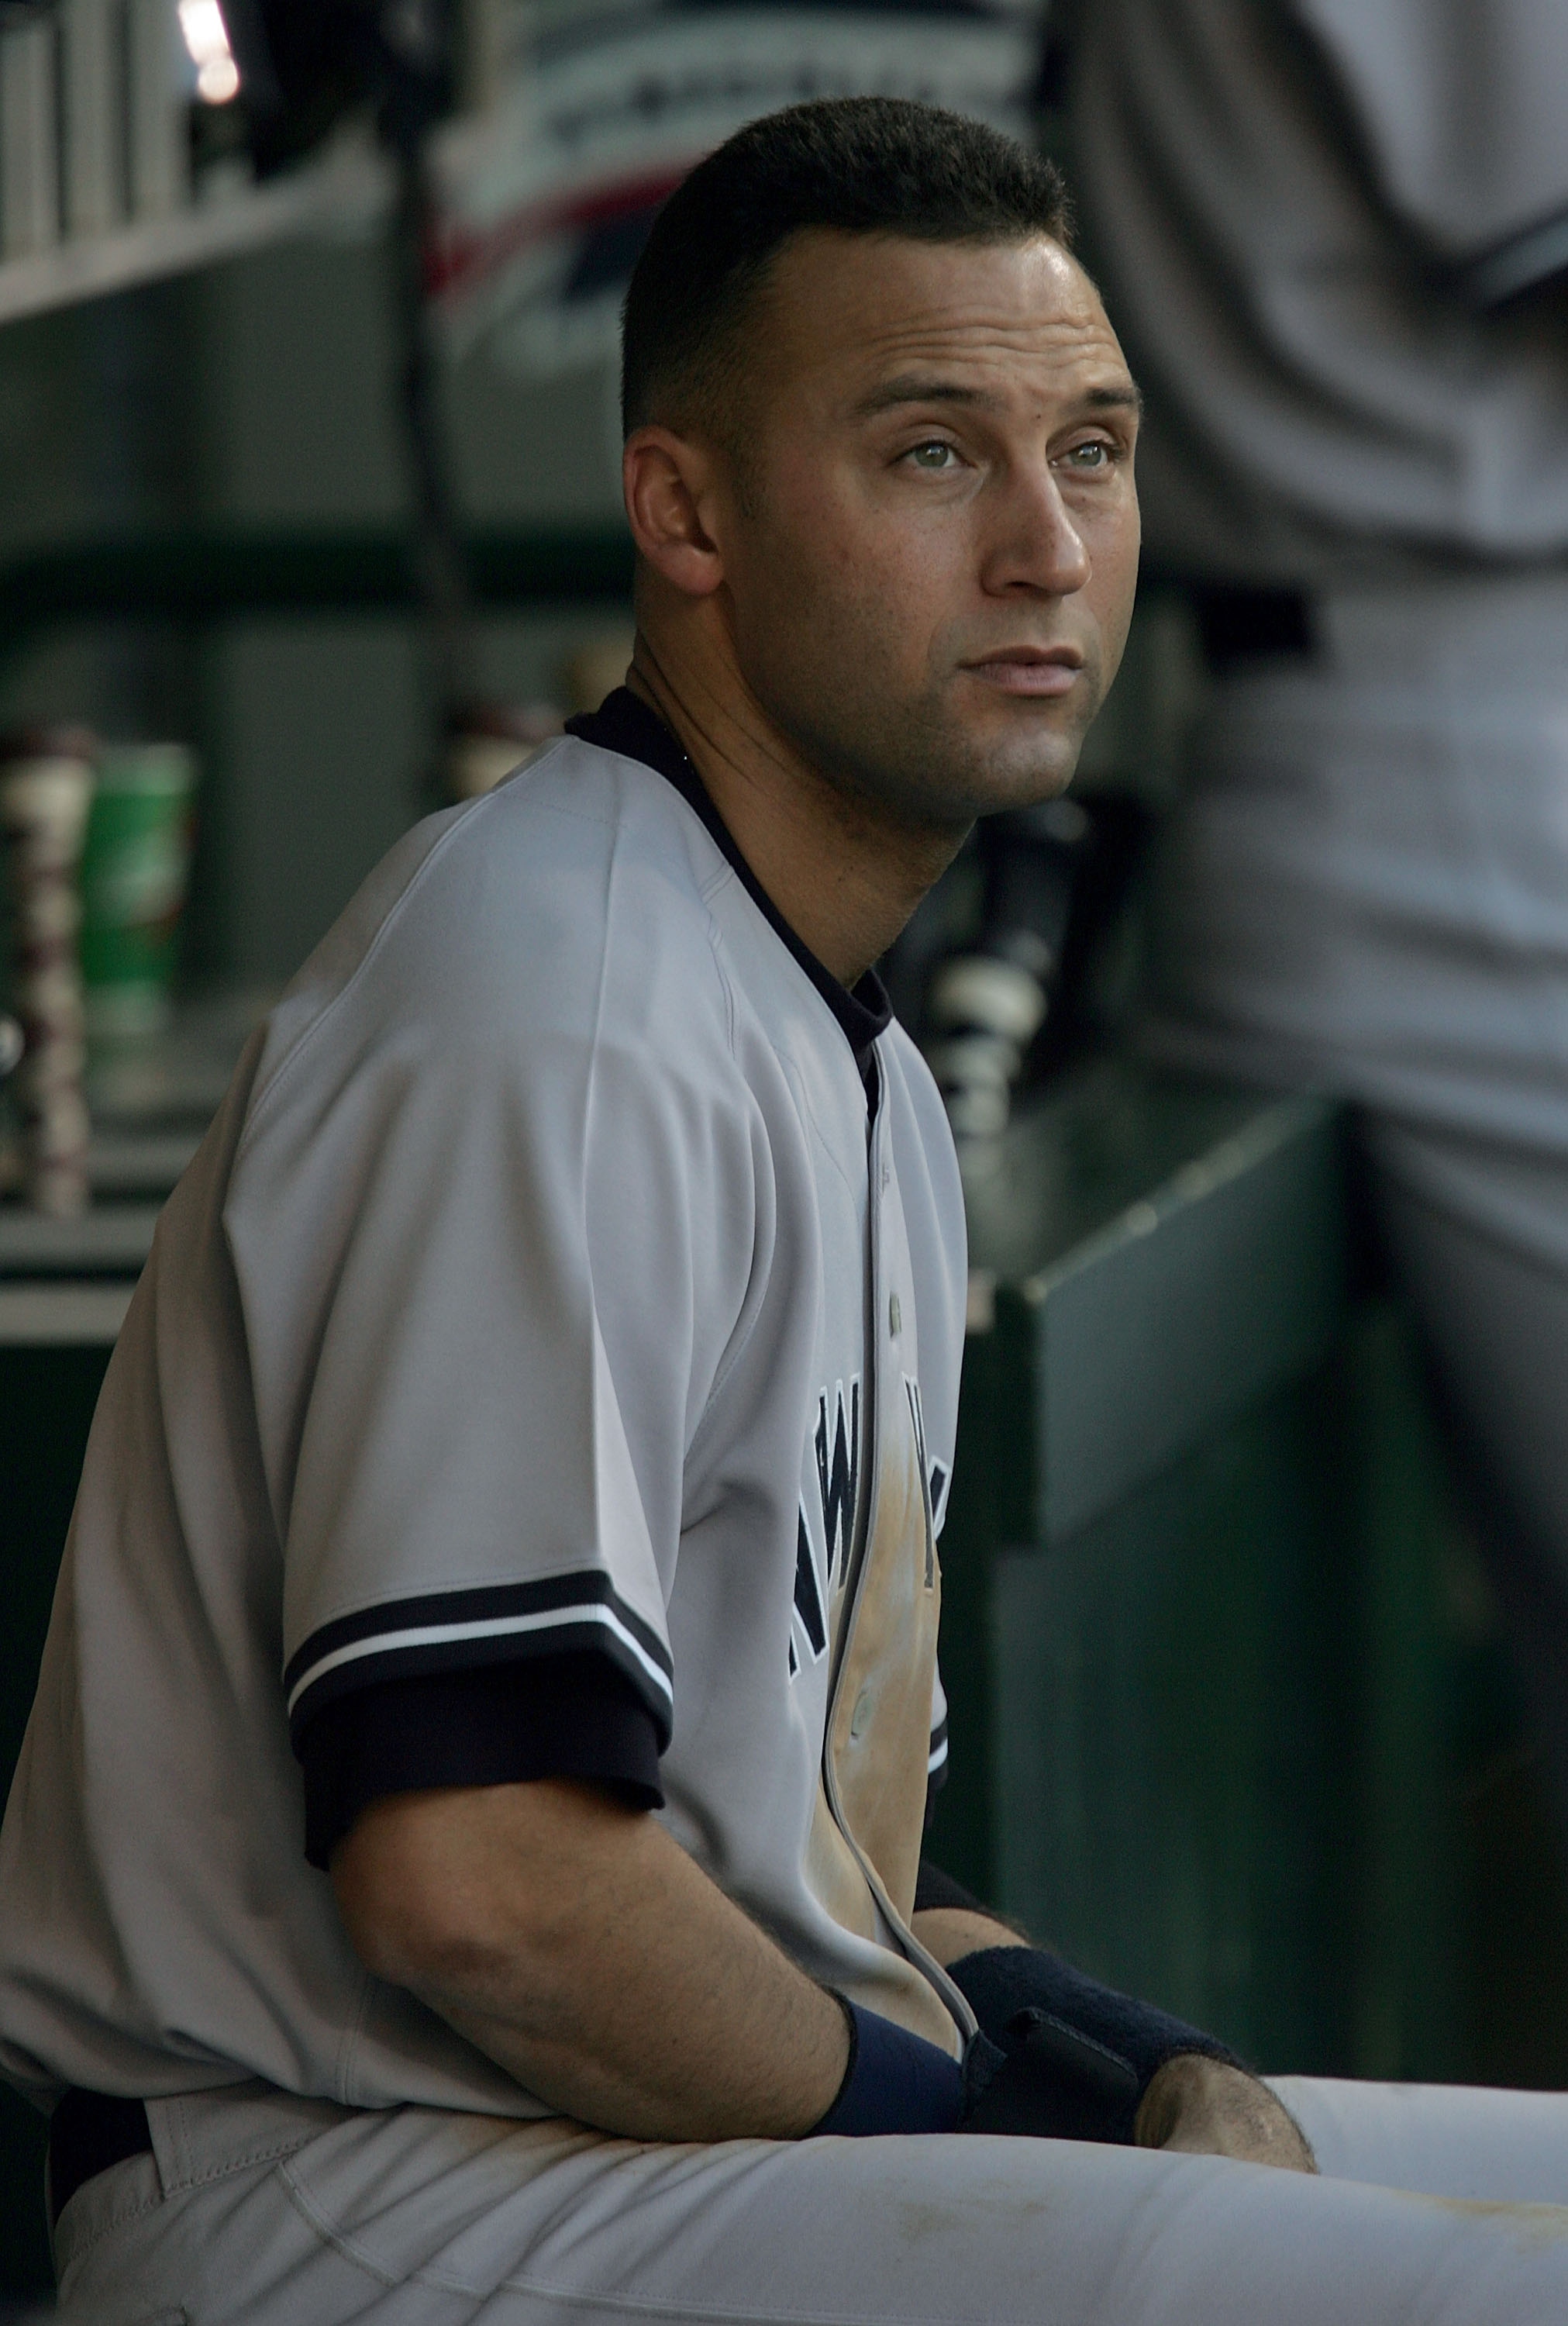 ANAHEIM, CA - OCTOBER 10:  Derek Jeter #2 of the New York Yankees sits in the dugout early in the game against the Los Angeles Angels of Anaheim during Game Five of the American League Division Series on October 10, 2005 at Angel Stadium in Anaheim, Calif